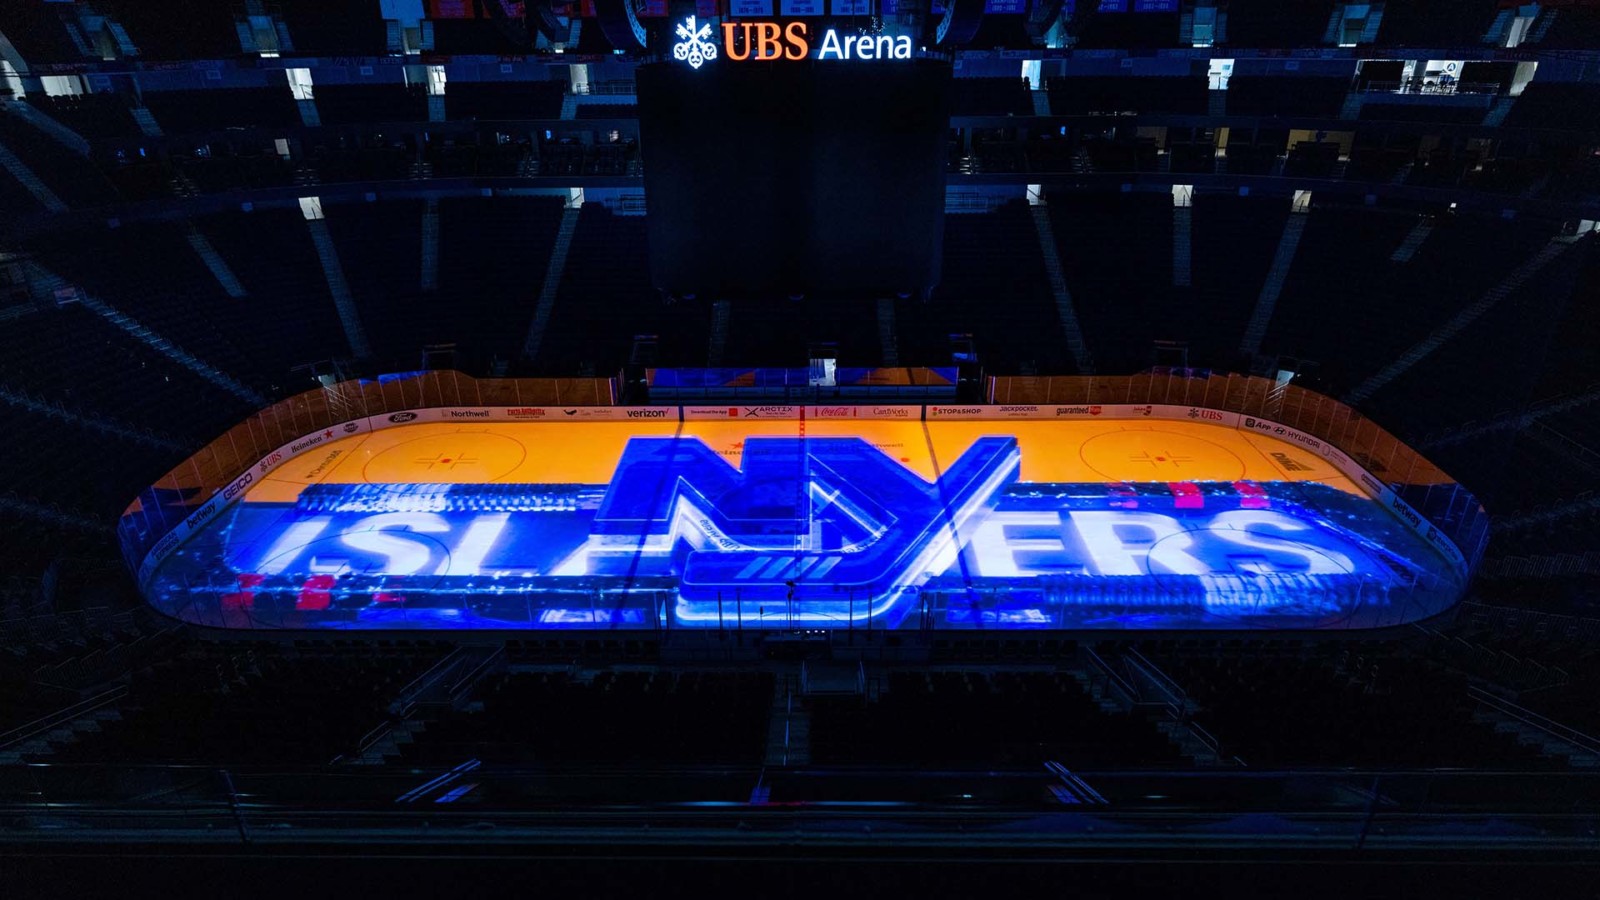 UBS Arena - New York Islanders - NHL - Ice - Projection Mapping